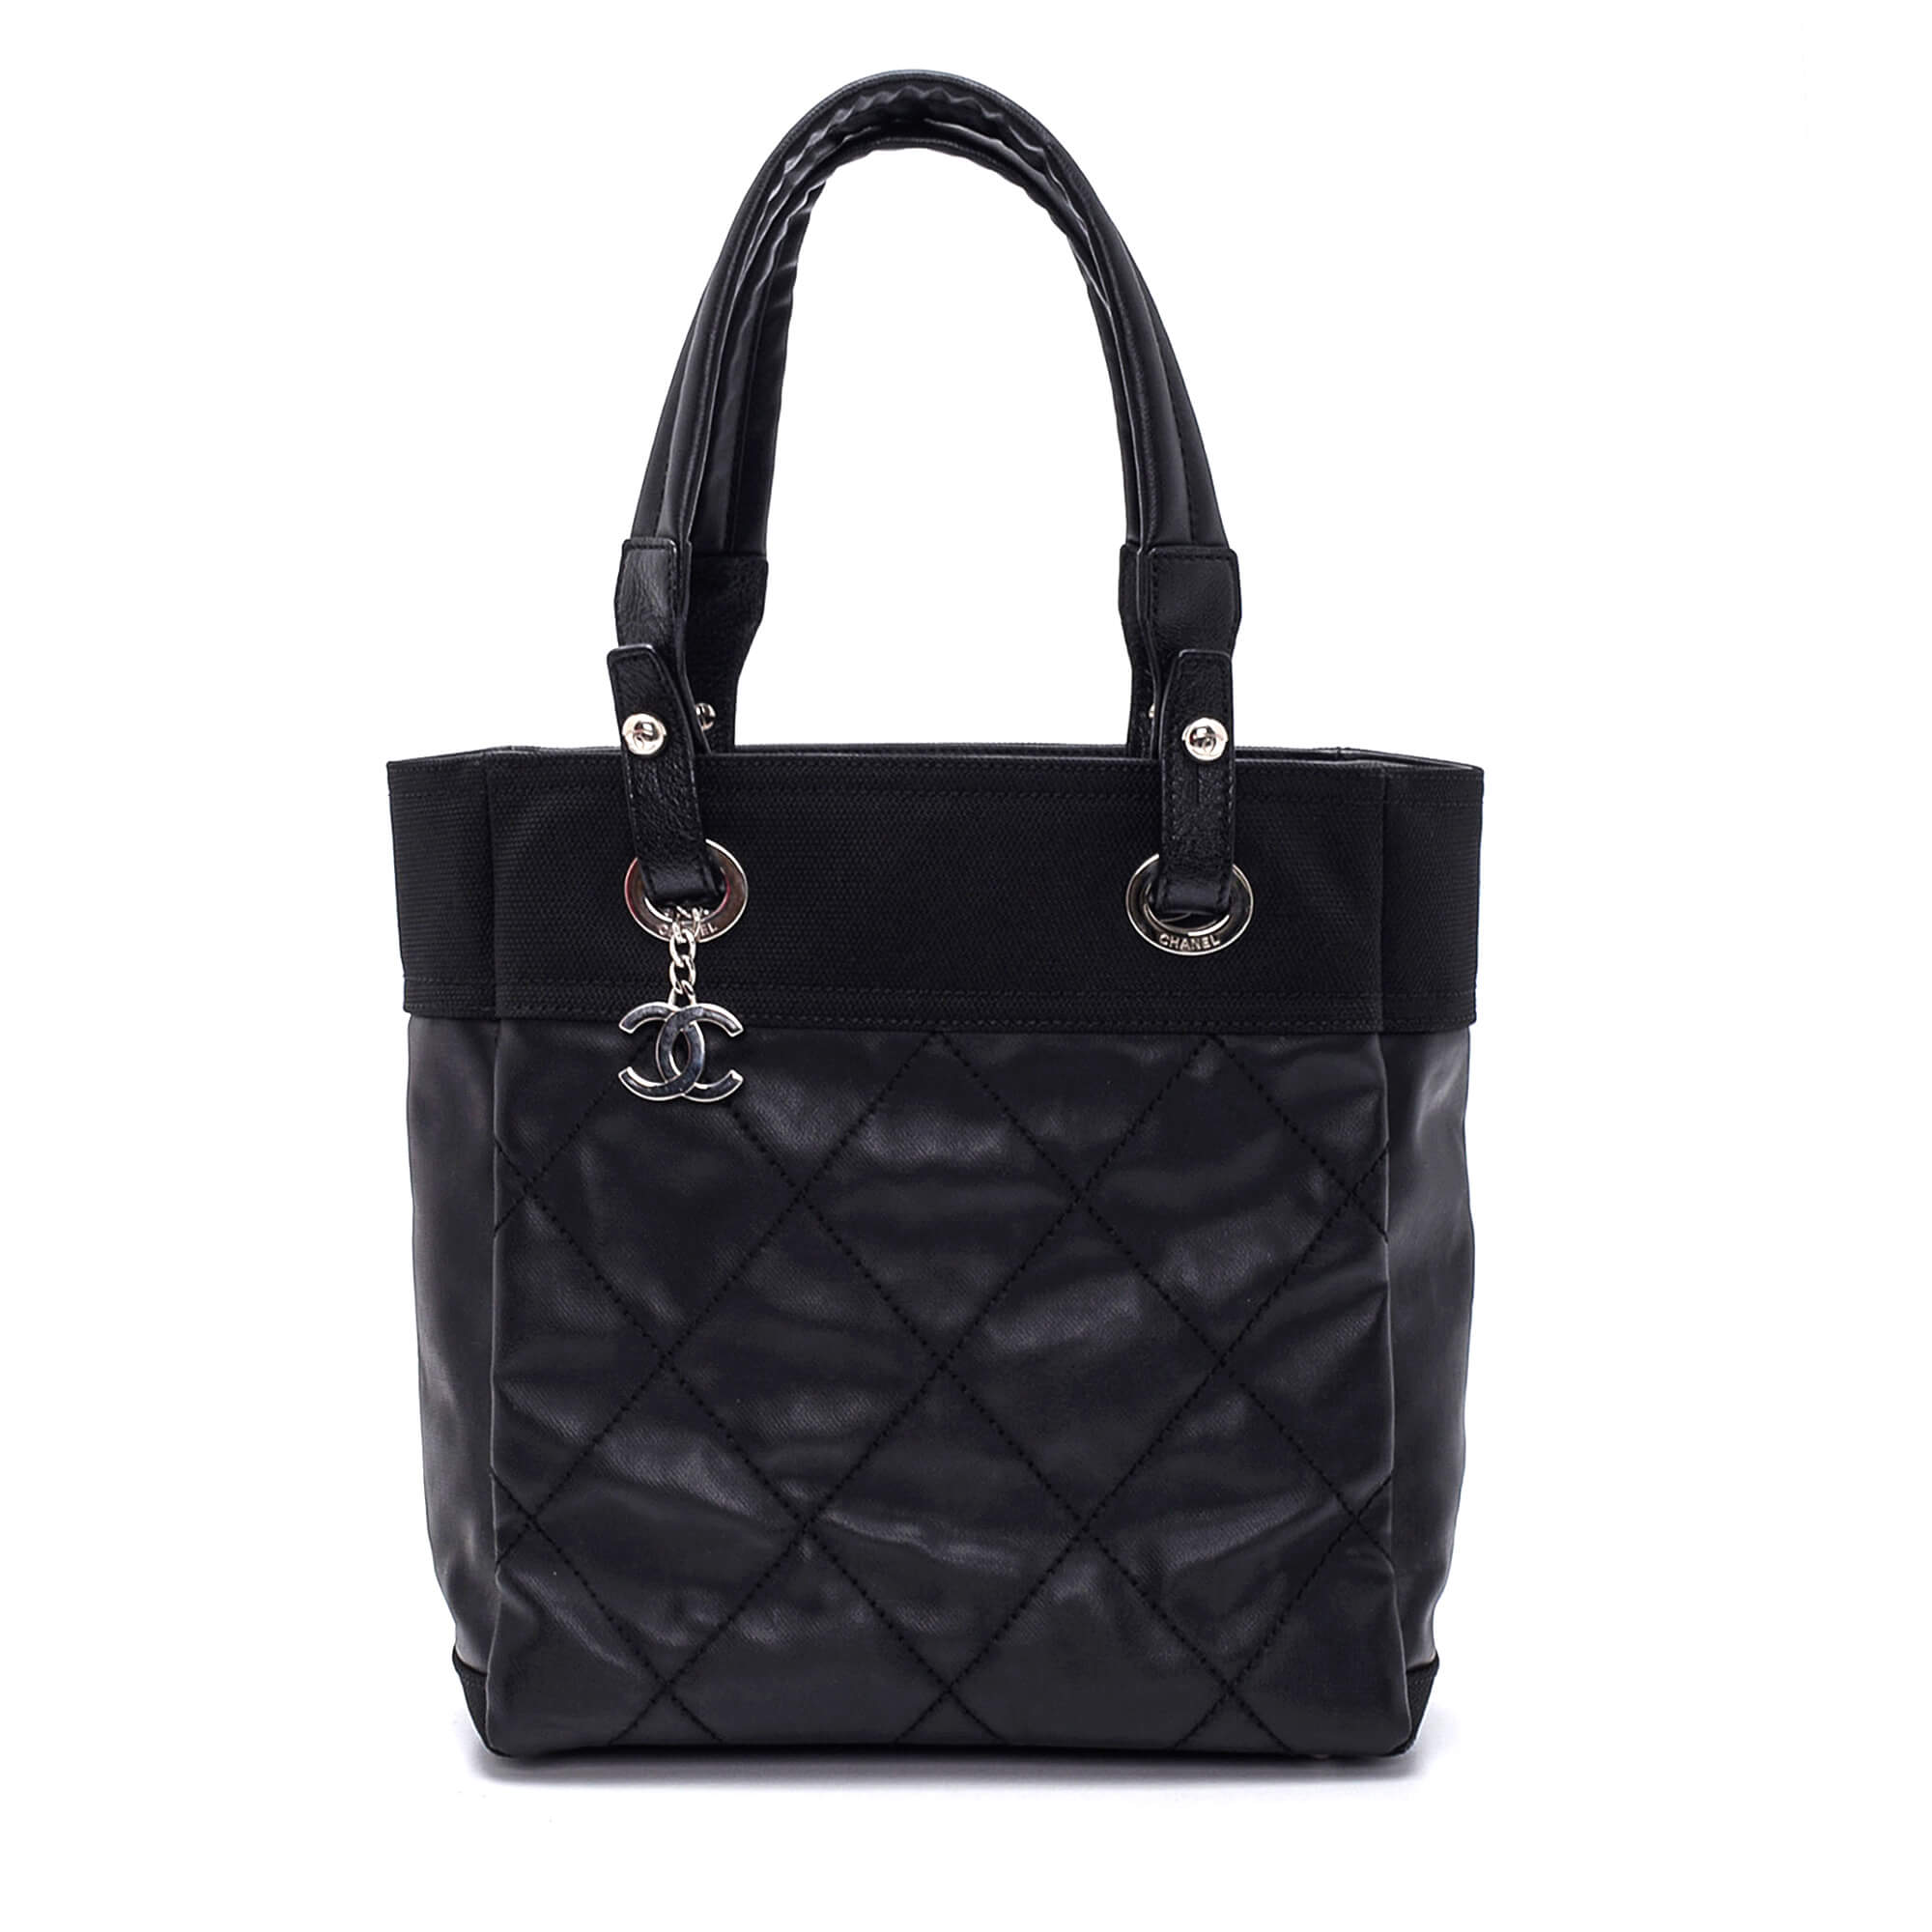 Chanel - Black Calfskin Quilted Leather and Nylon Paris Biarritz Bag